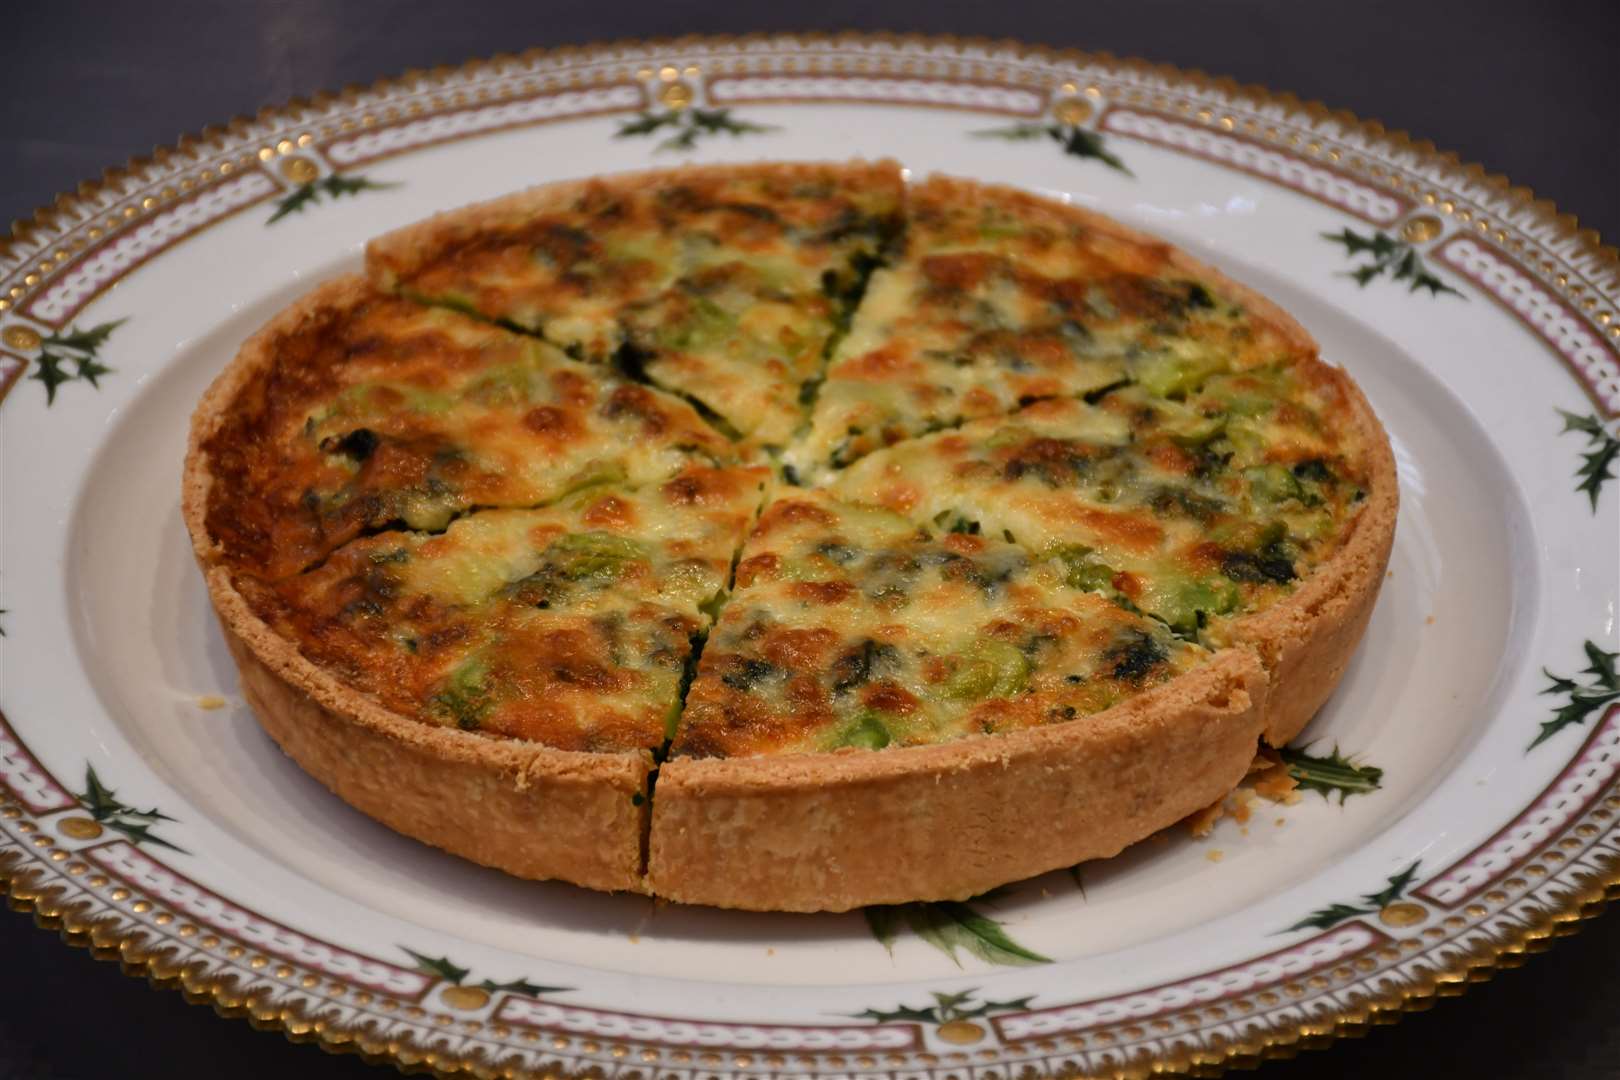 Coronation Quiche - King Charles III and the Queen Consort have shared a recipe for "Coronation Quiche" in celebration of the Big Lunches due to be staged to mark their coronation.